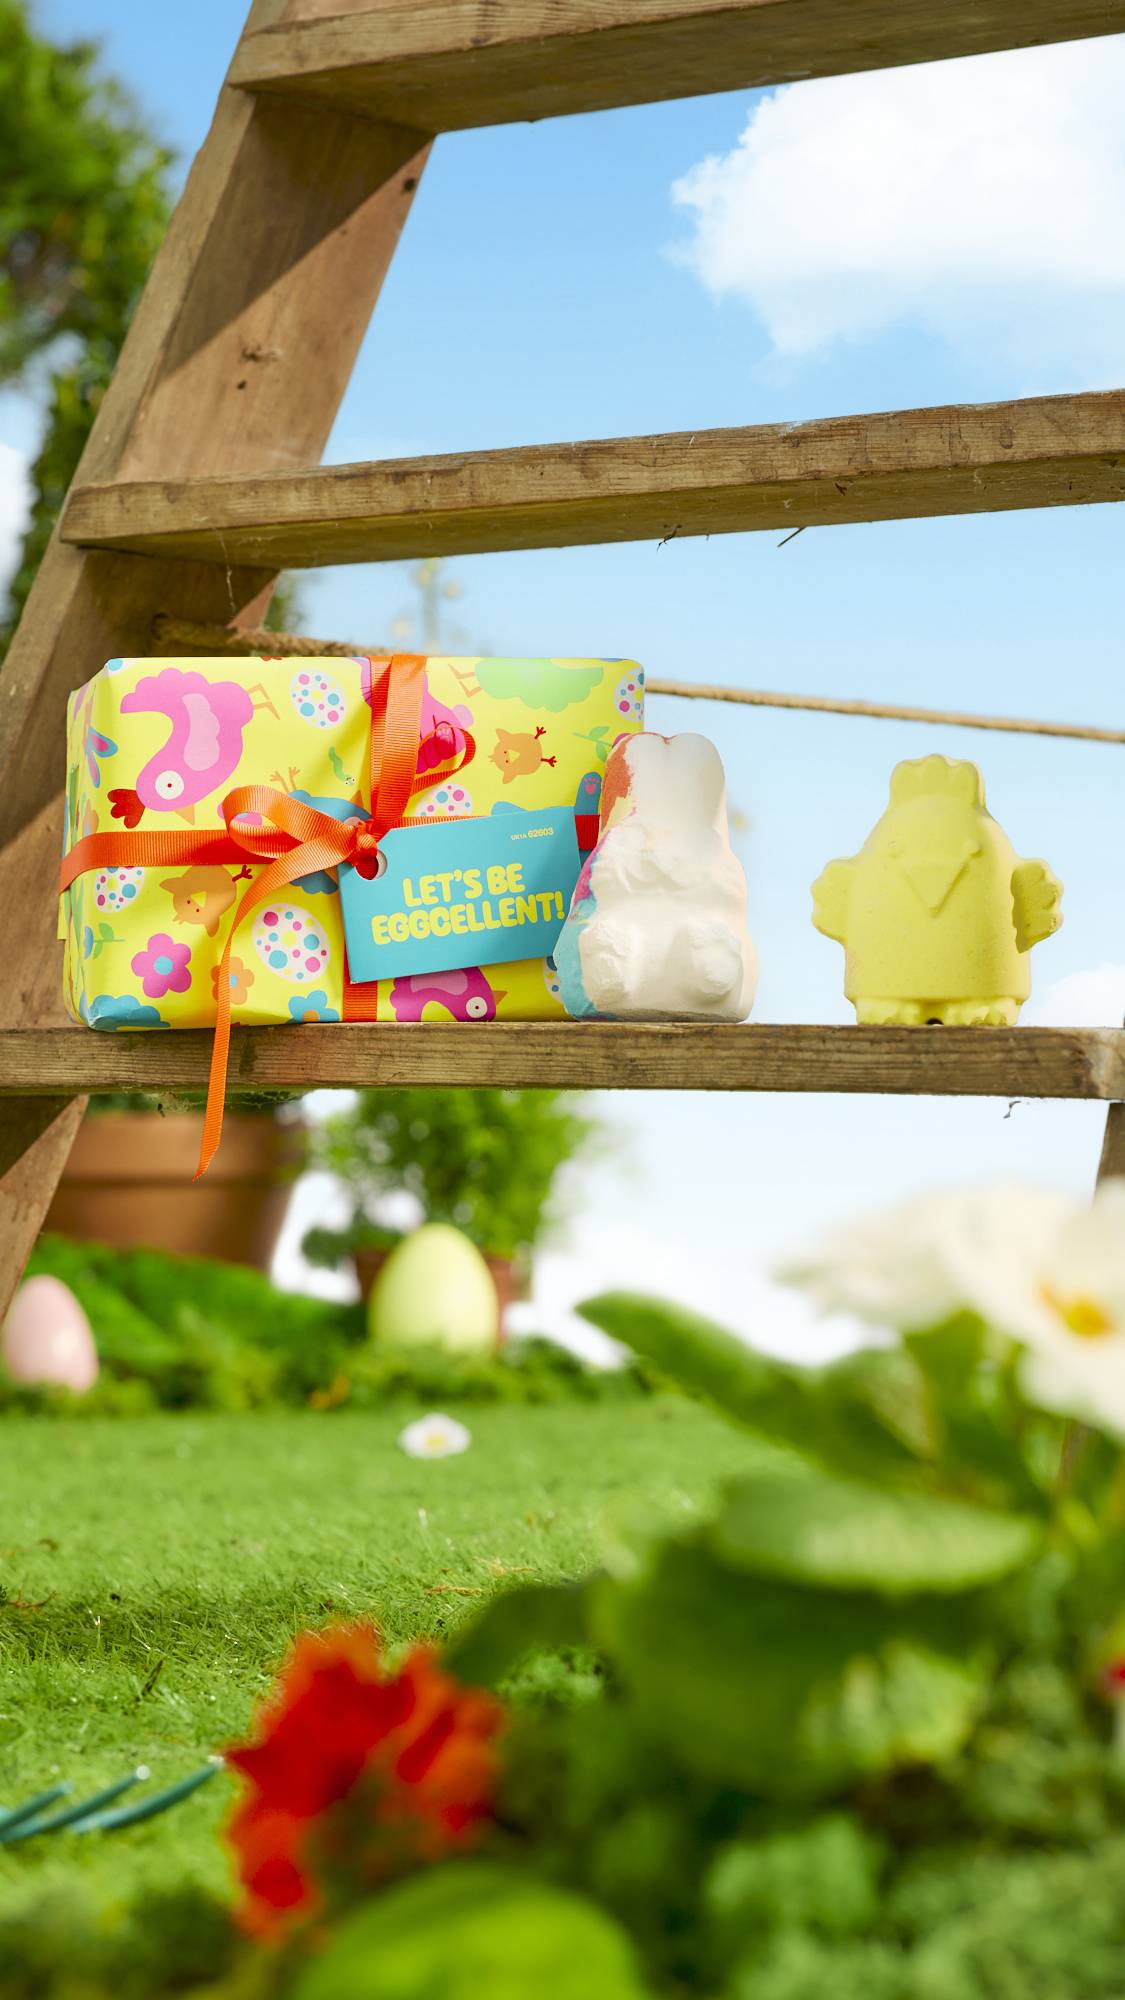 The image shows a wooden ladder under blue skies surrounded by fresh grass and flowers.  The bright gift box and two bath products sit on a ladder step.